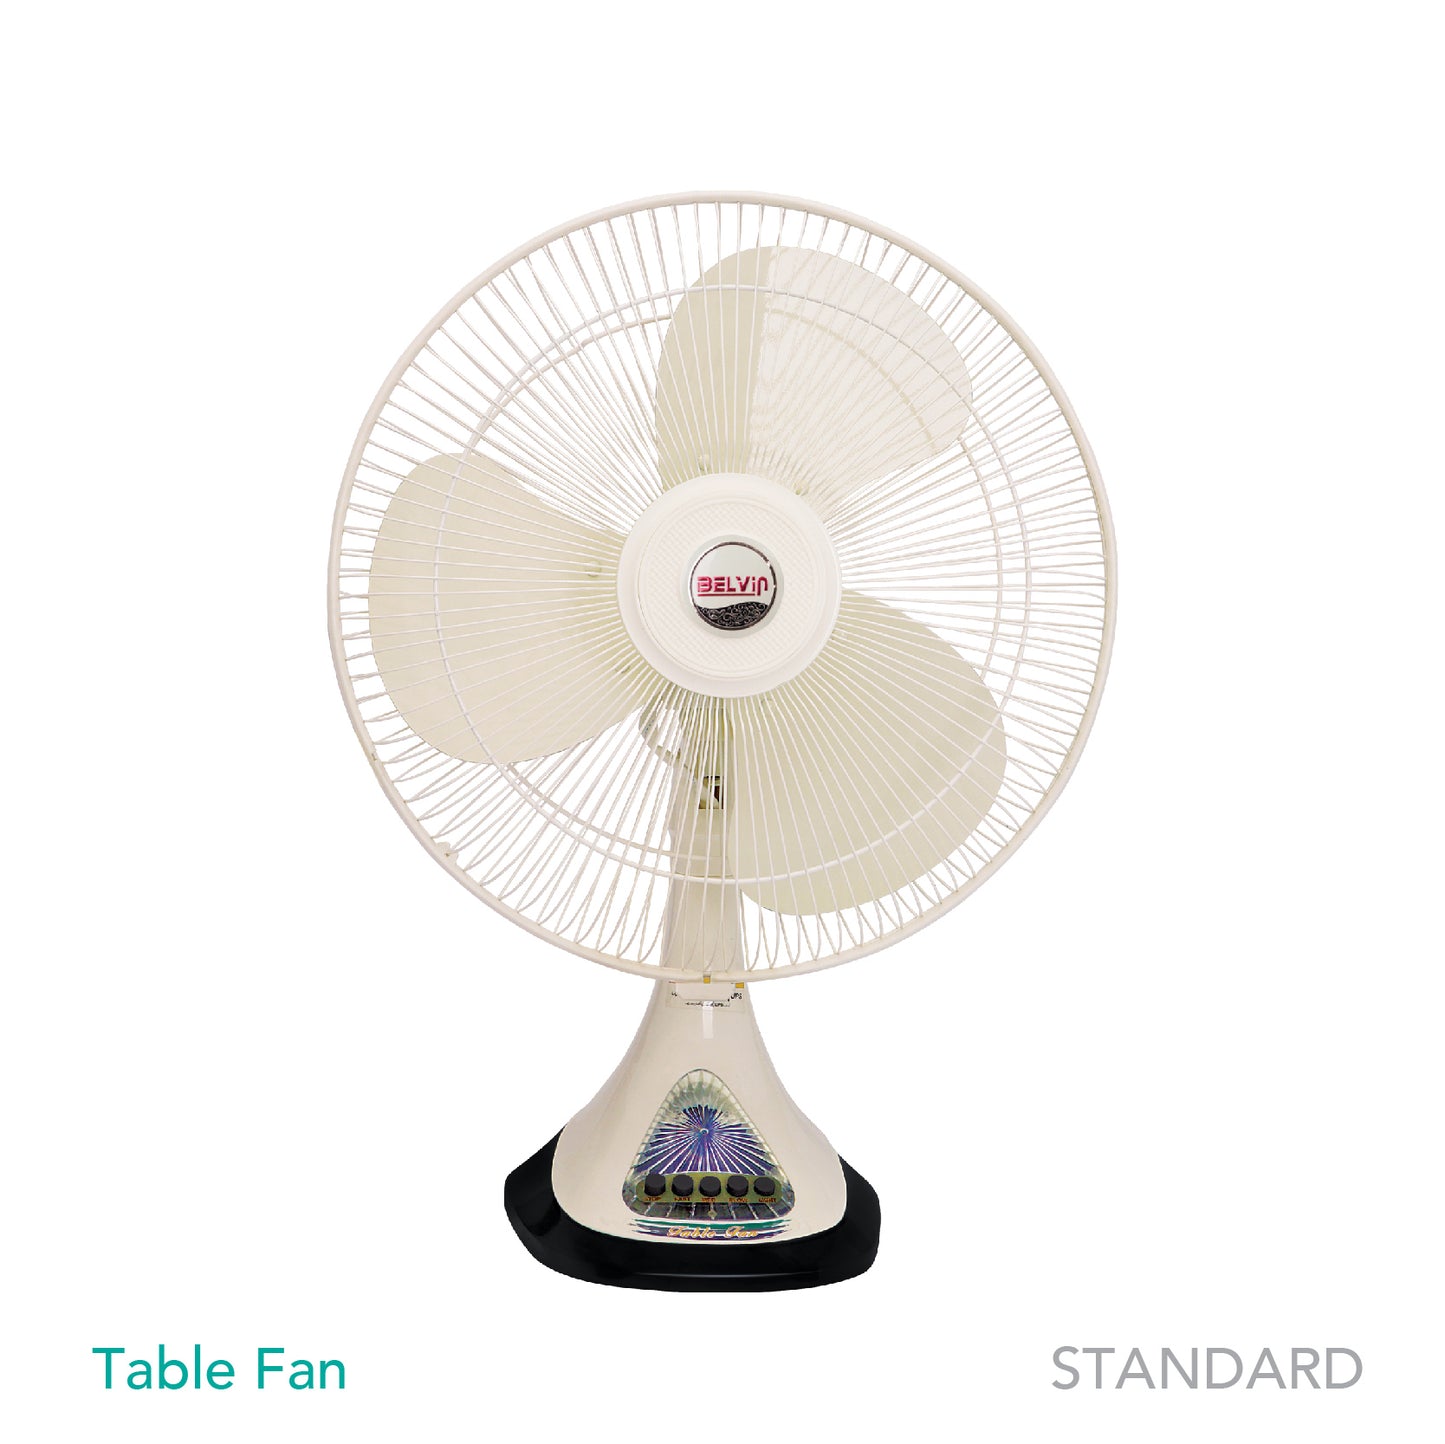 Belvin Table Fan 18 Inch Pure Copper Wire (99.9%) Export Quality Noiseless Motor Smooth Oscillation Brand Warranty